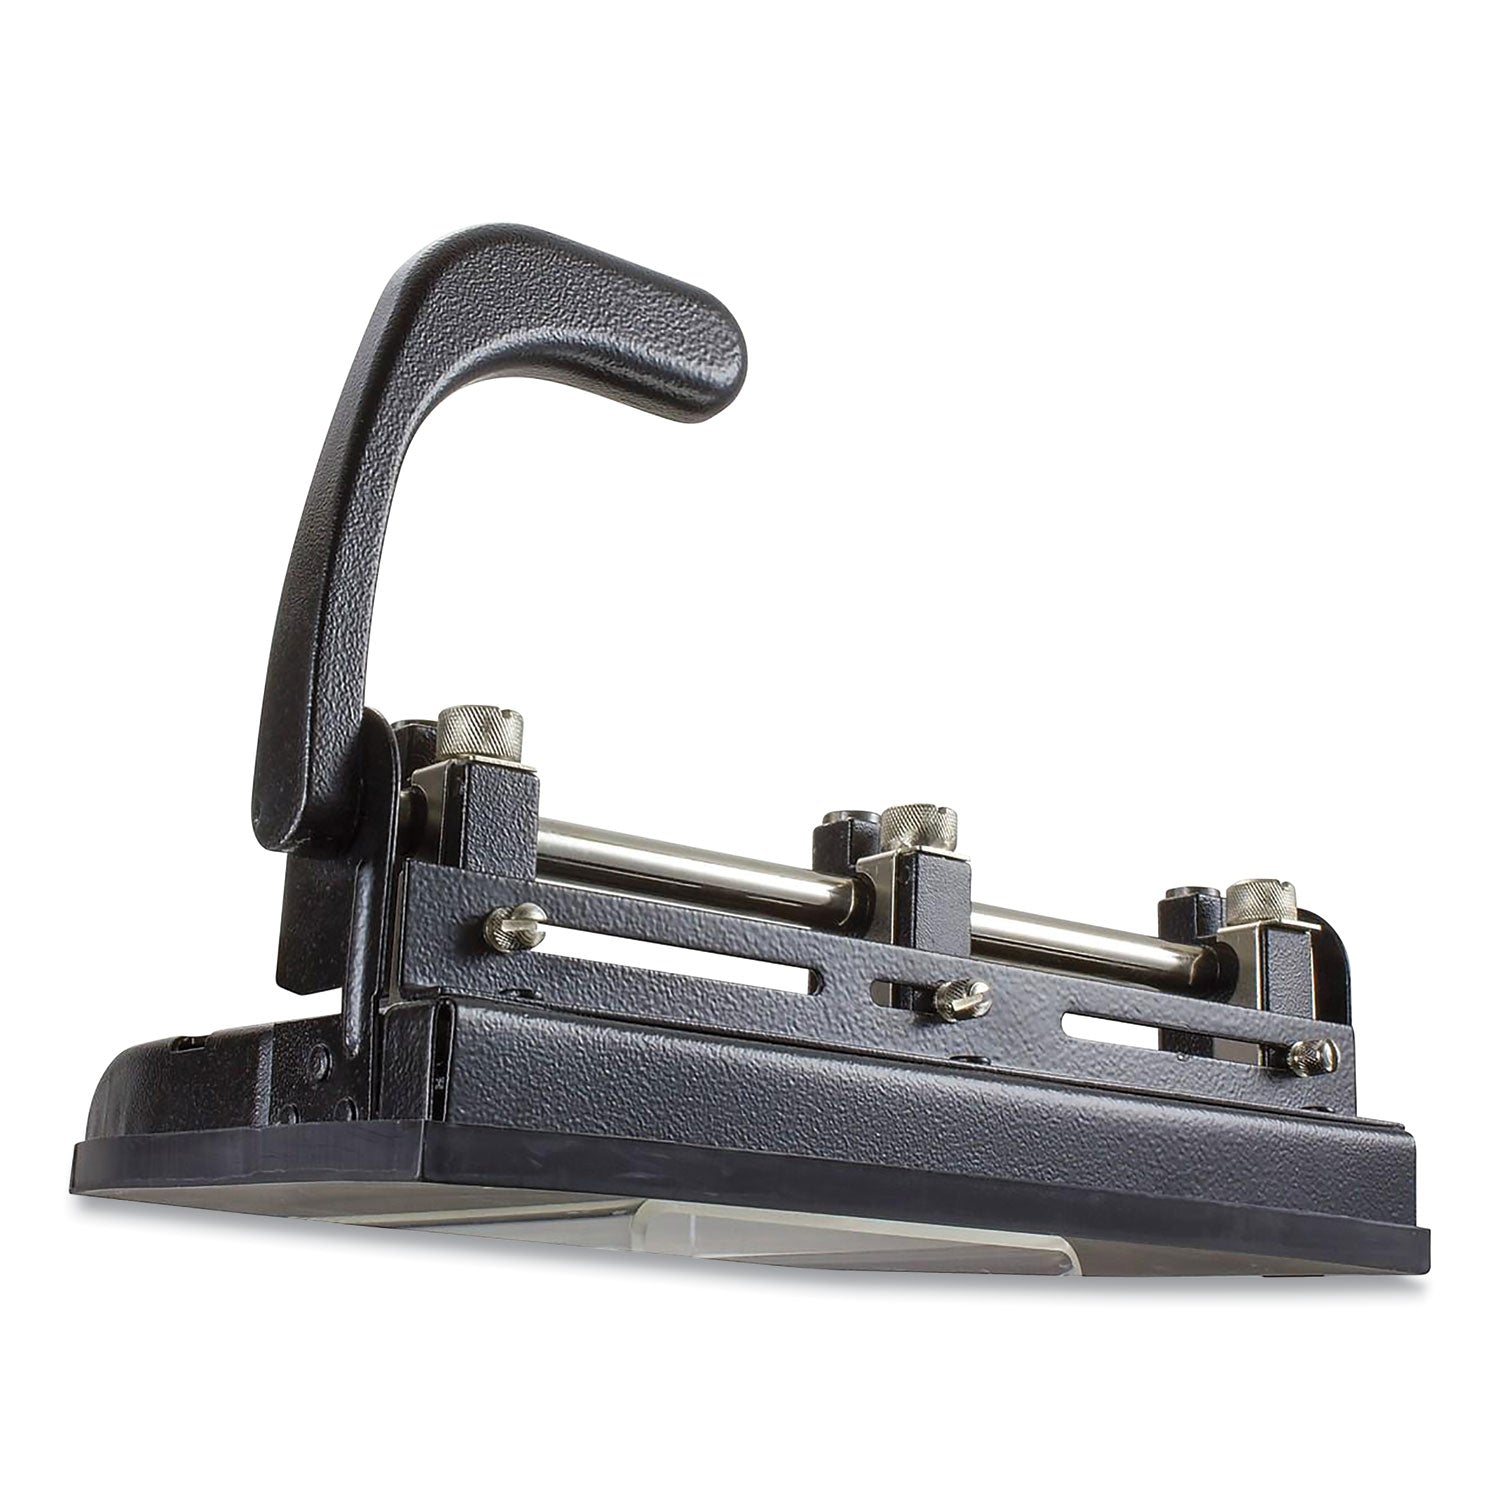 32-Sheet Heavy-Duty Two-Three-Hole Punch with Lever Handle, 9/32" Holes, Black - 